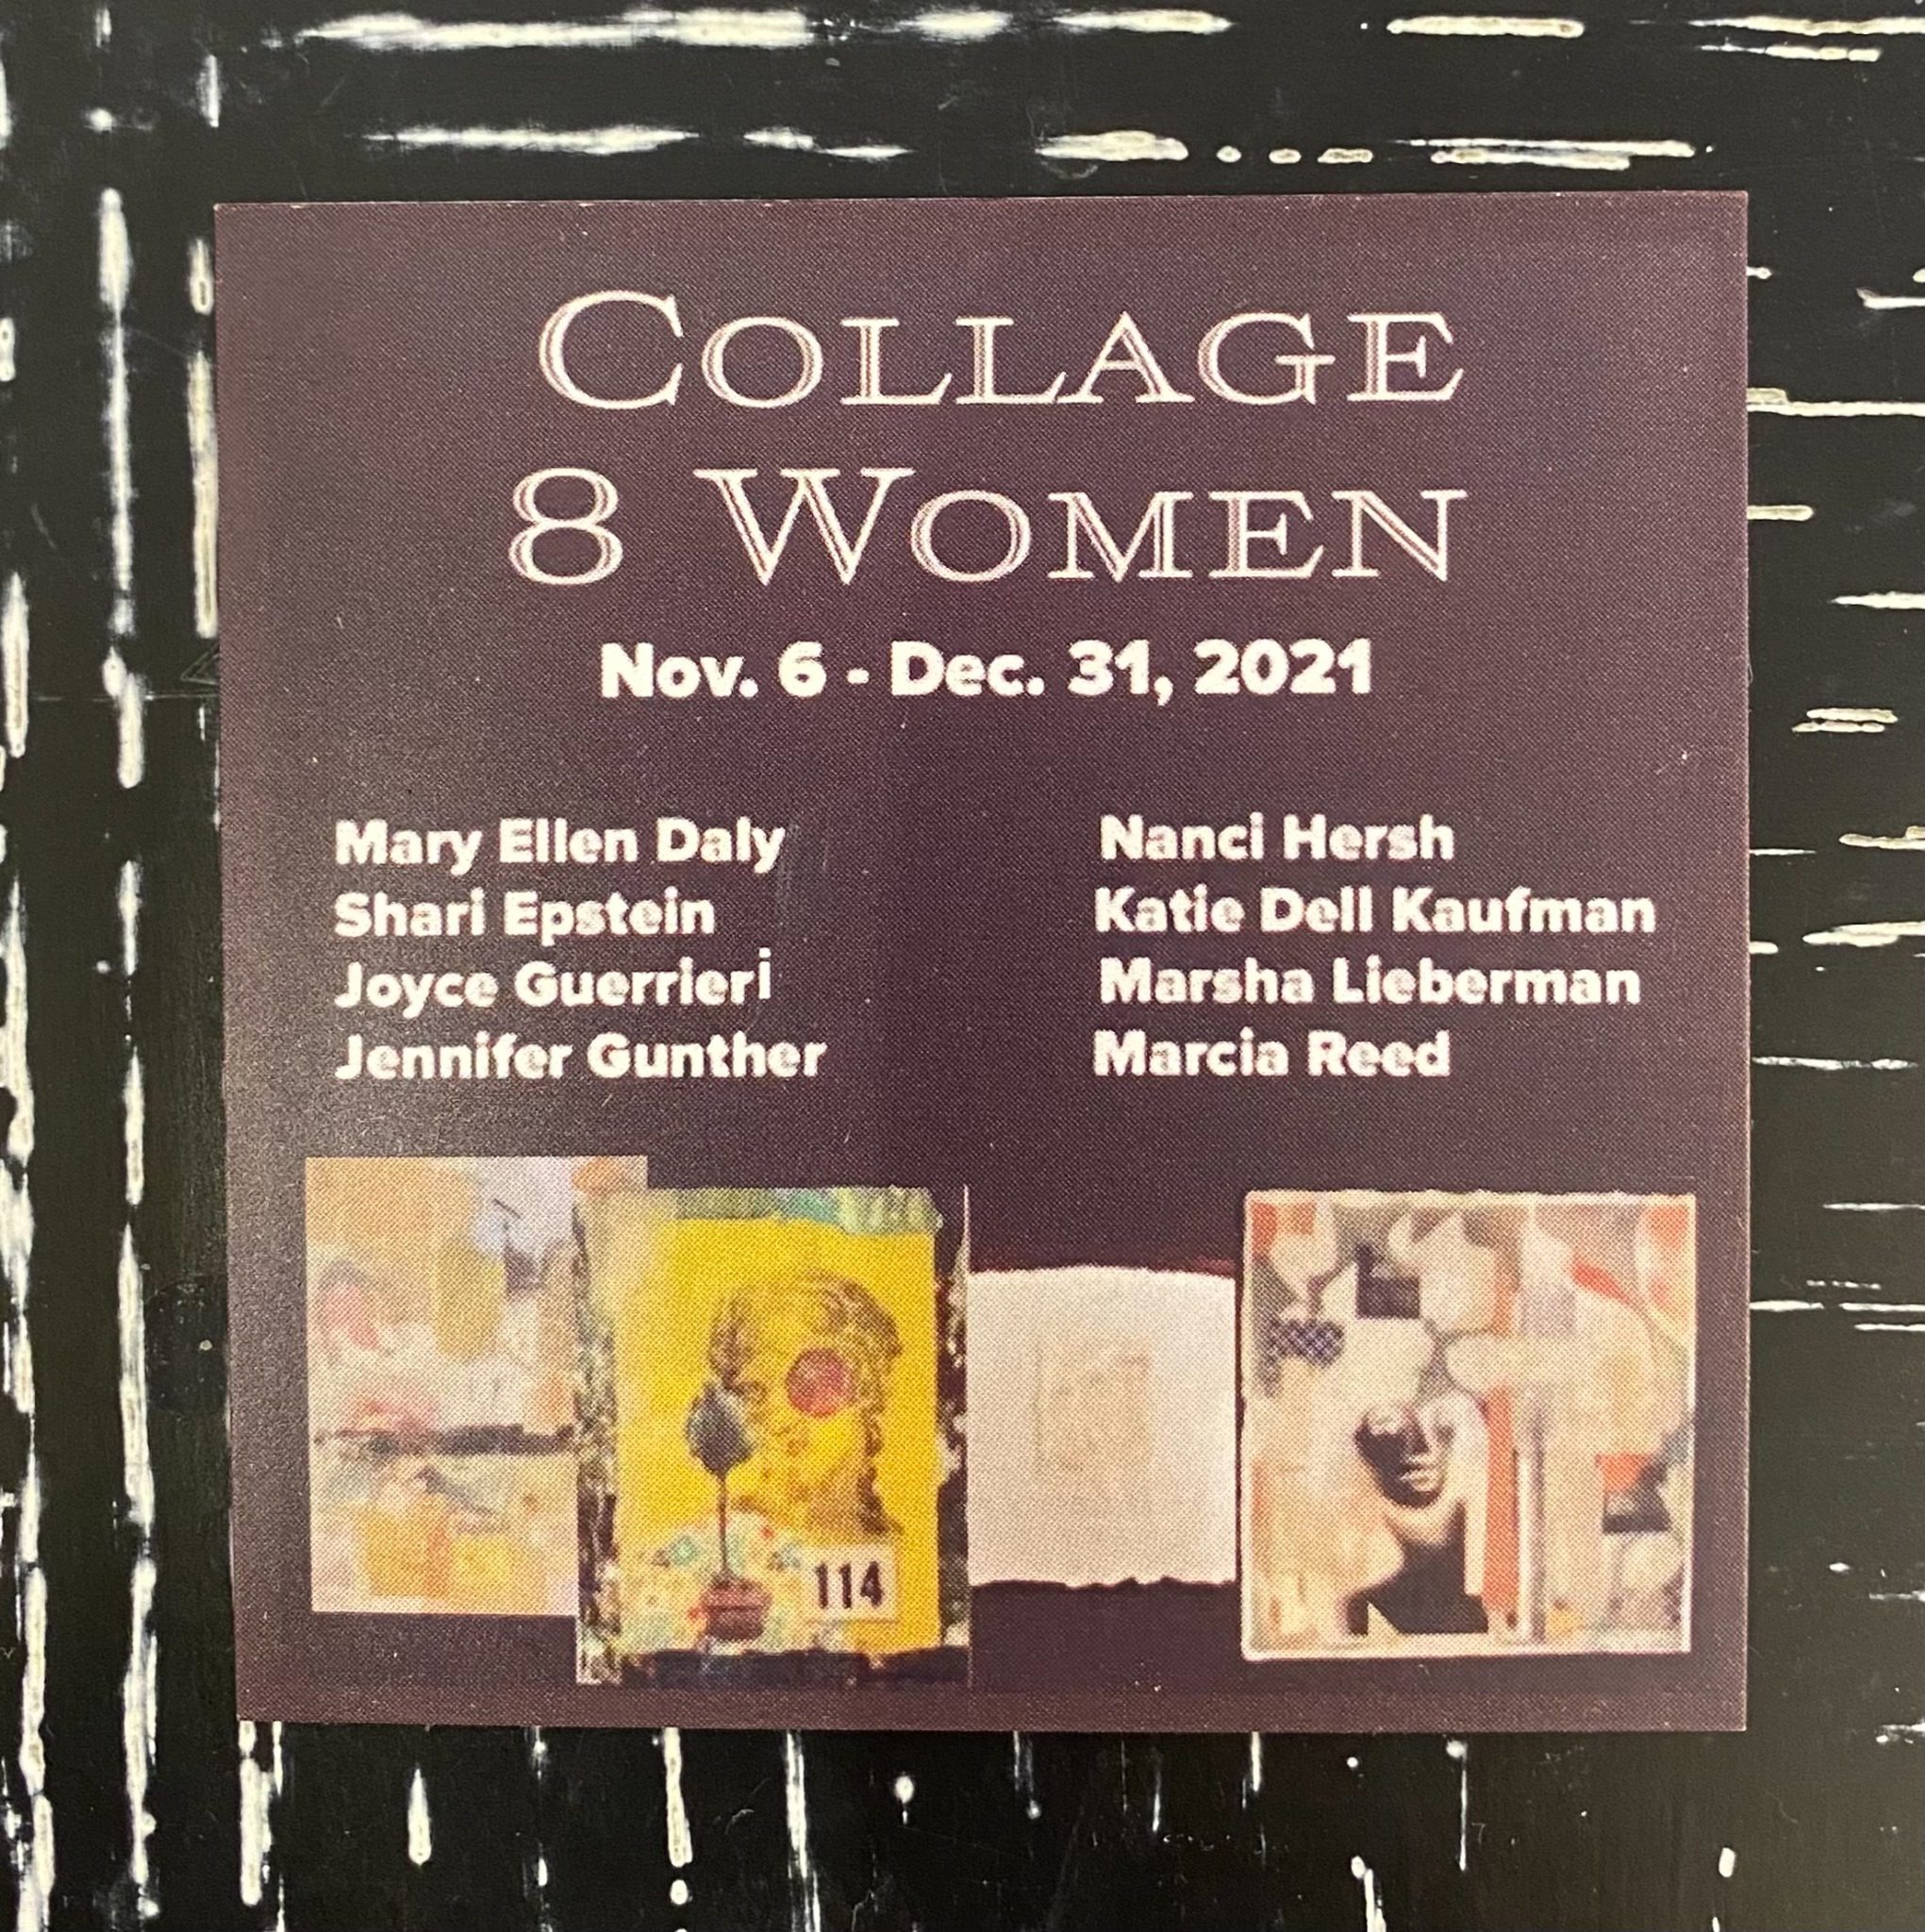 Featured image for “Gallery 37 Presents Collage Show by 8 Women Artists”